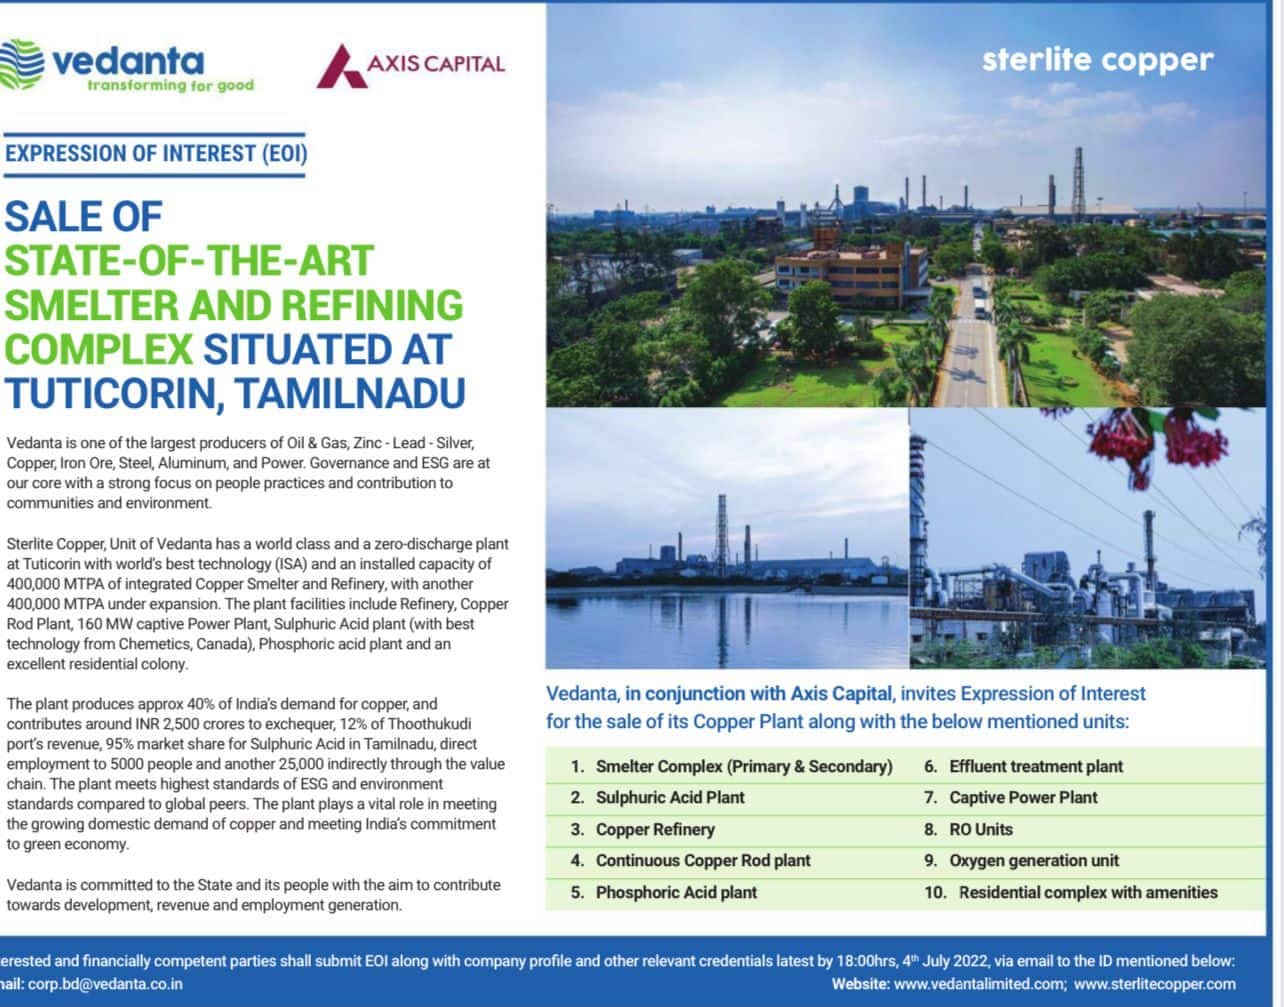 Vedanta has advertised for EoIs in its Tuticorin copper plant